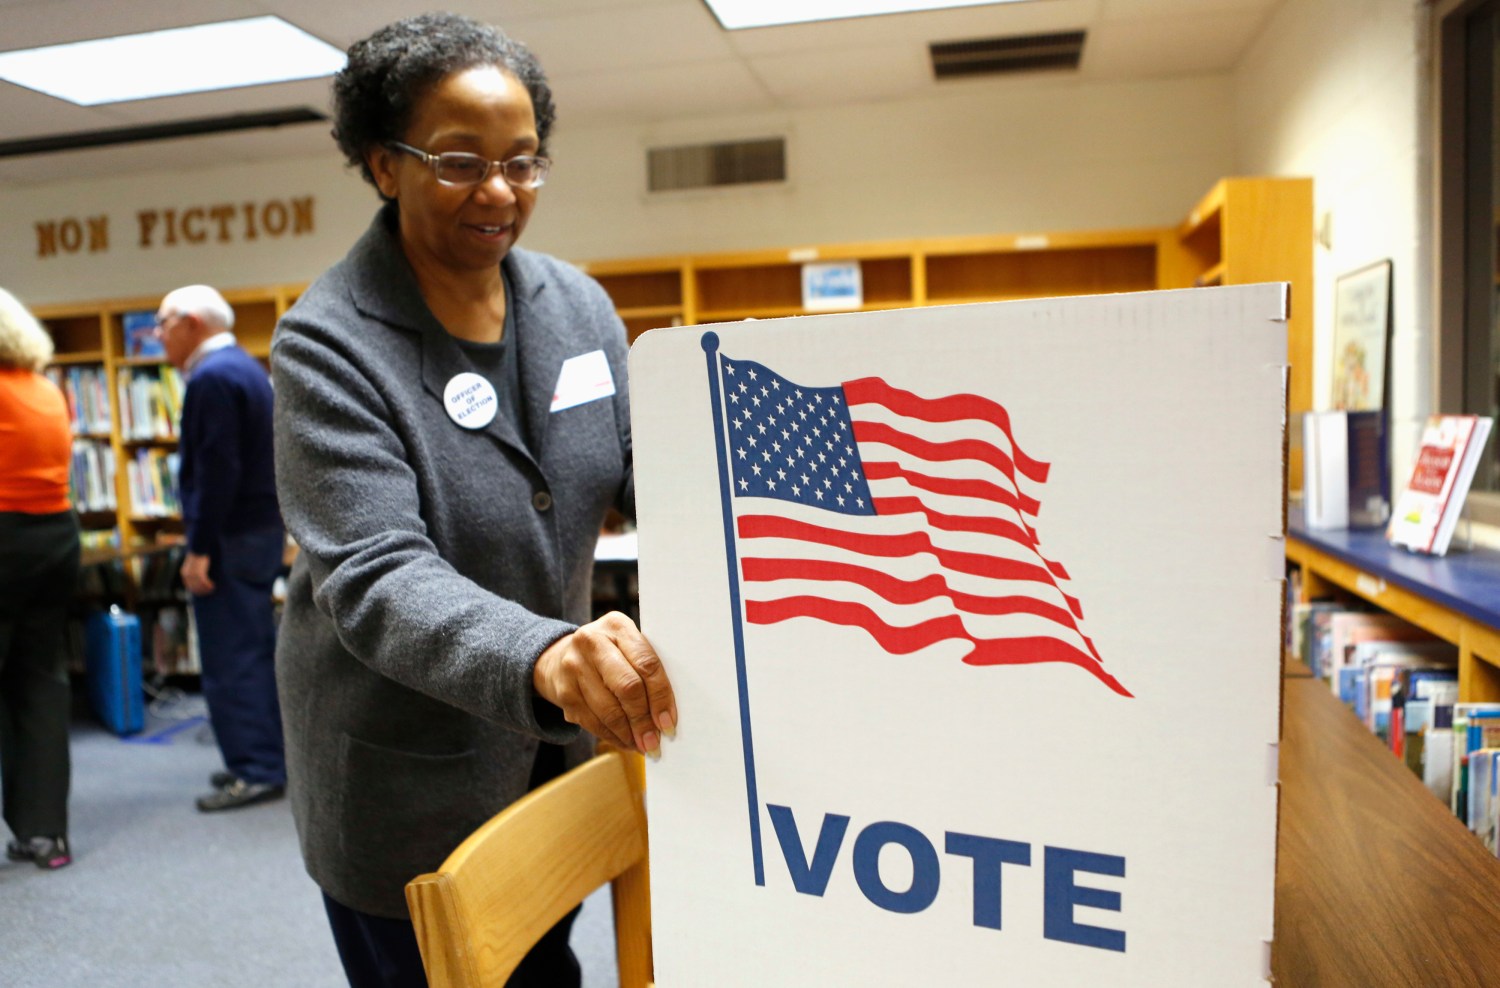 An election worker sets up a voting booth in the library of Spring Hill Elementary School, which is being used as a polling station in McLean, Virginia November 5, 2013. REUTERS/Kevin Lamarque (UNITED STATES - Tags: POLITICS ELECTIONS) - GM1E9B51PZY01